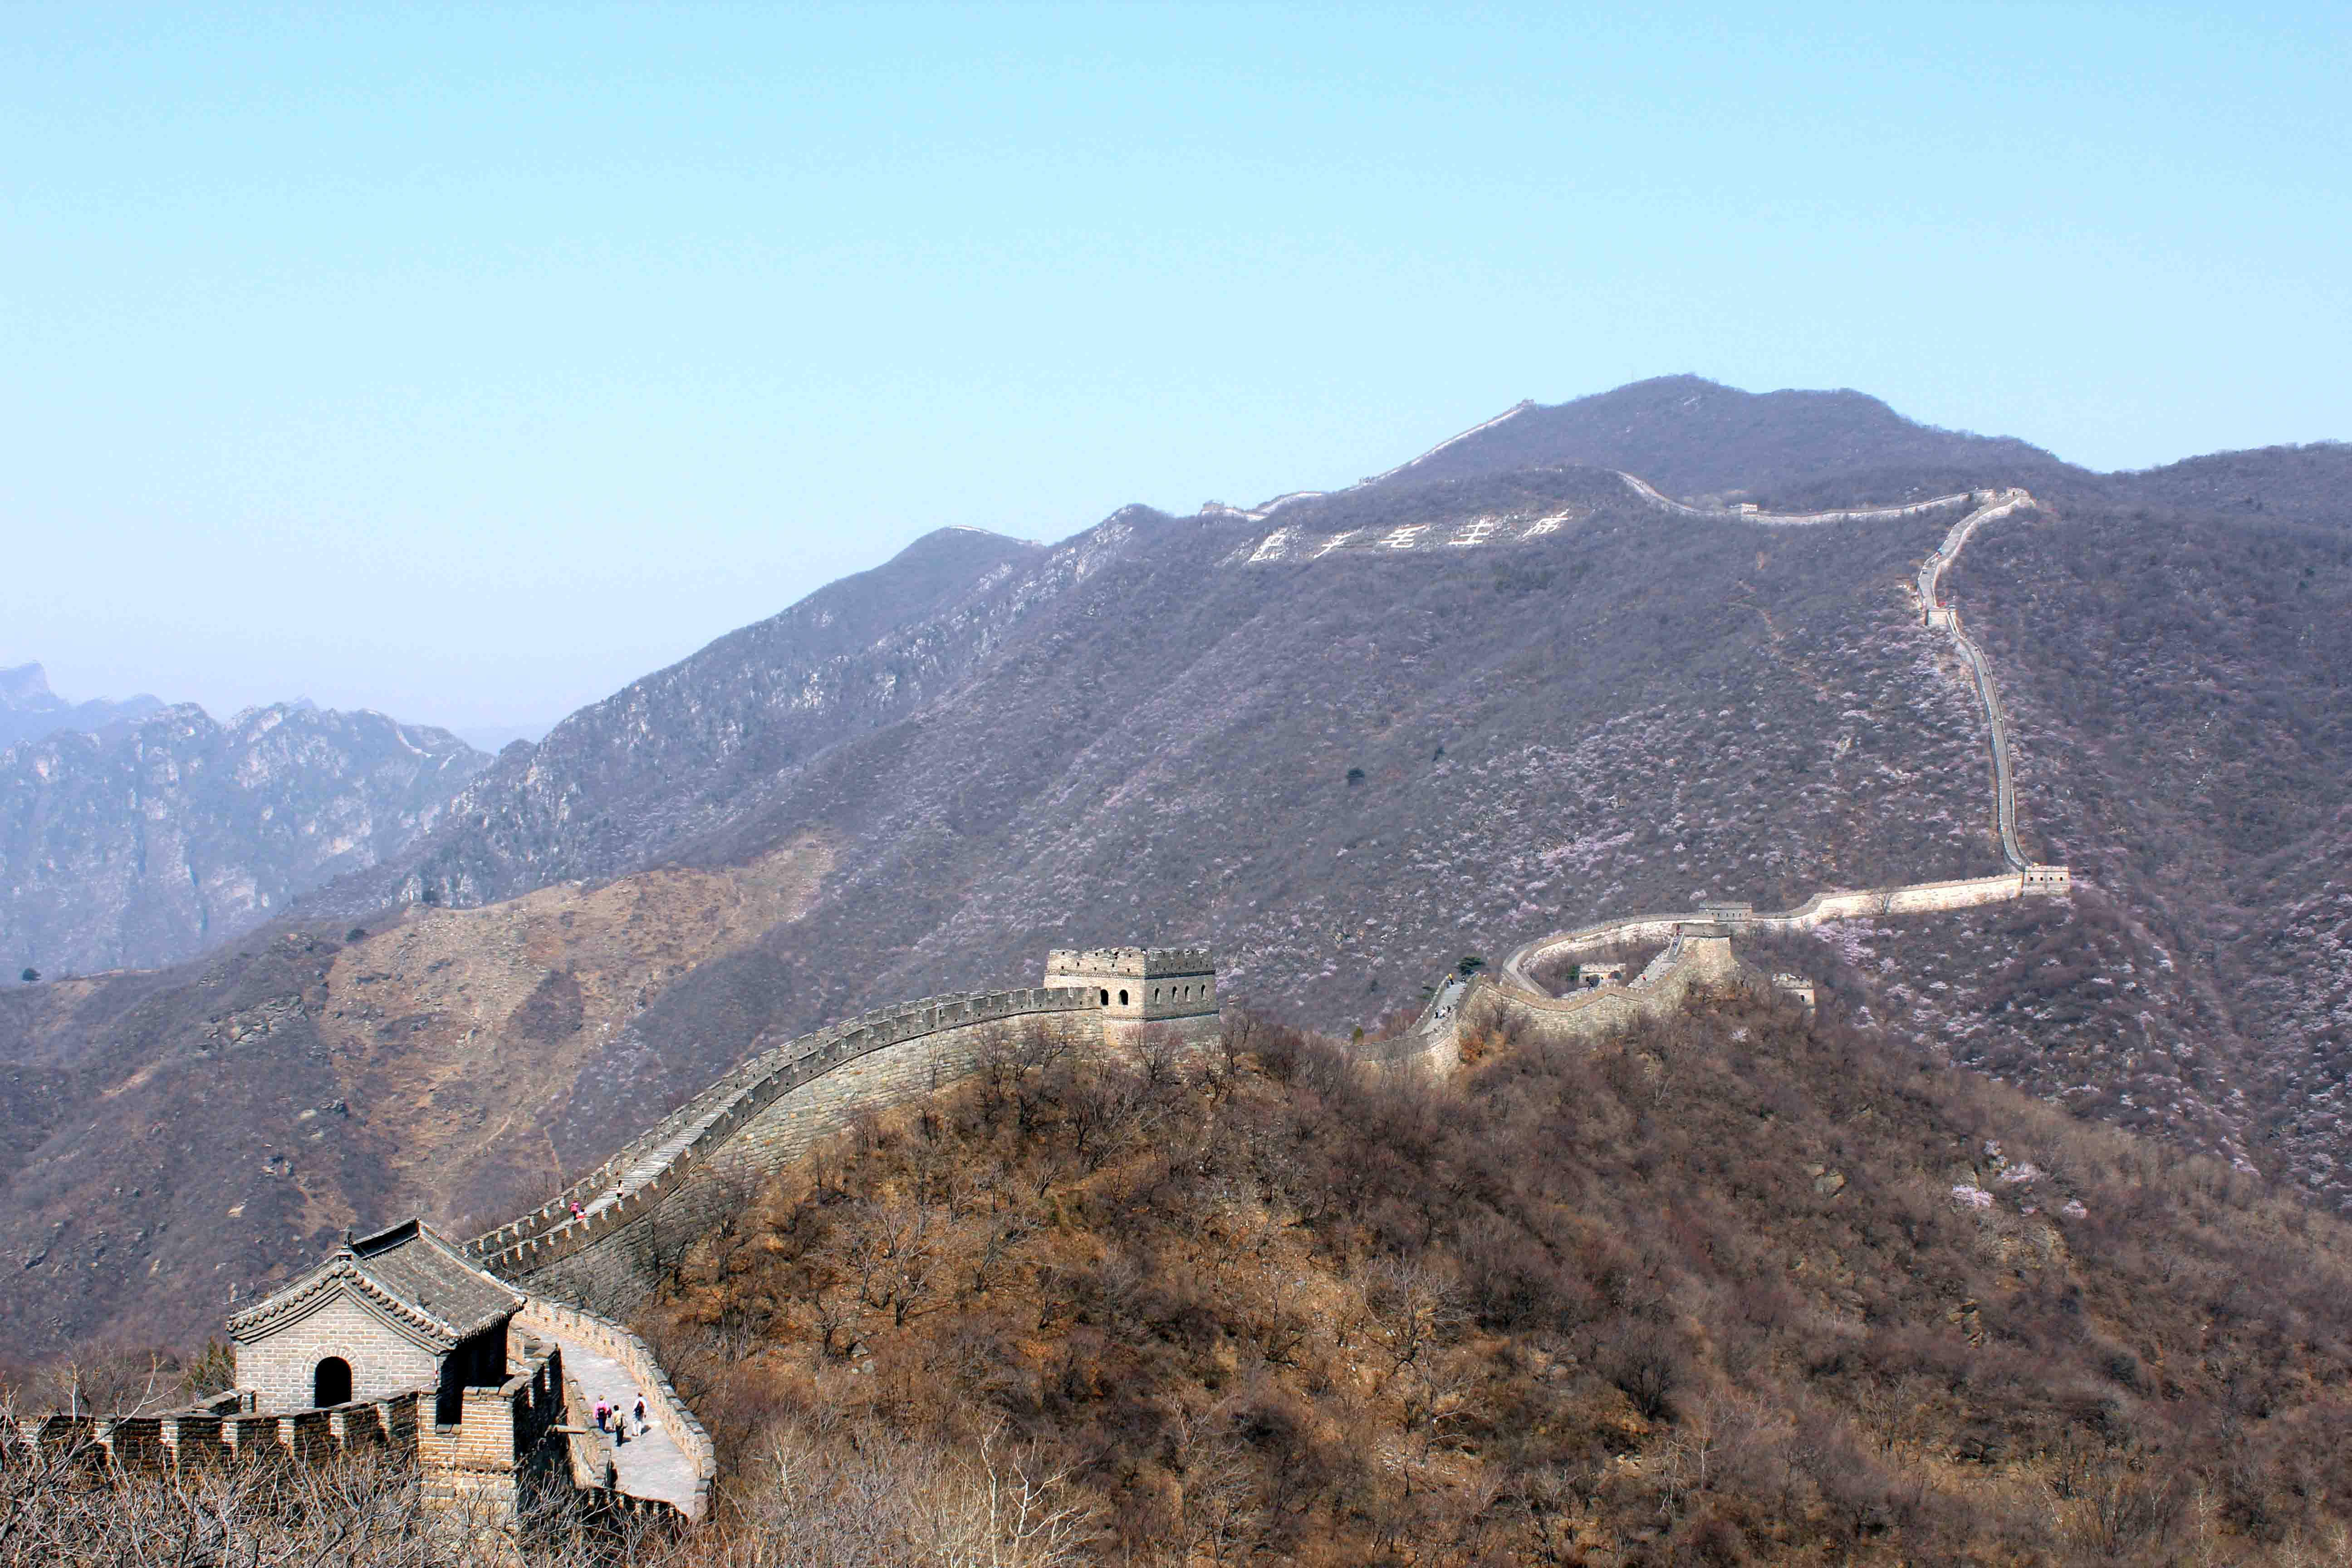 A Wonder of the World: The Great Wall of China